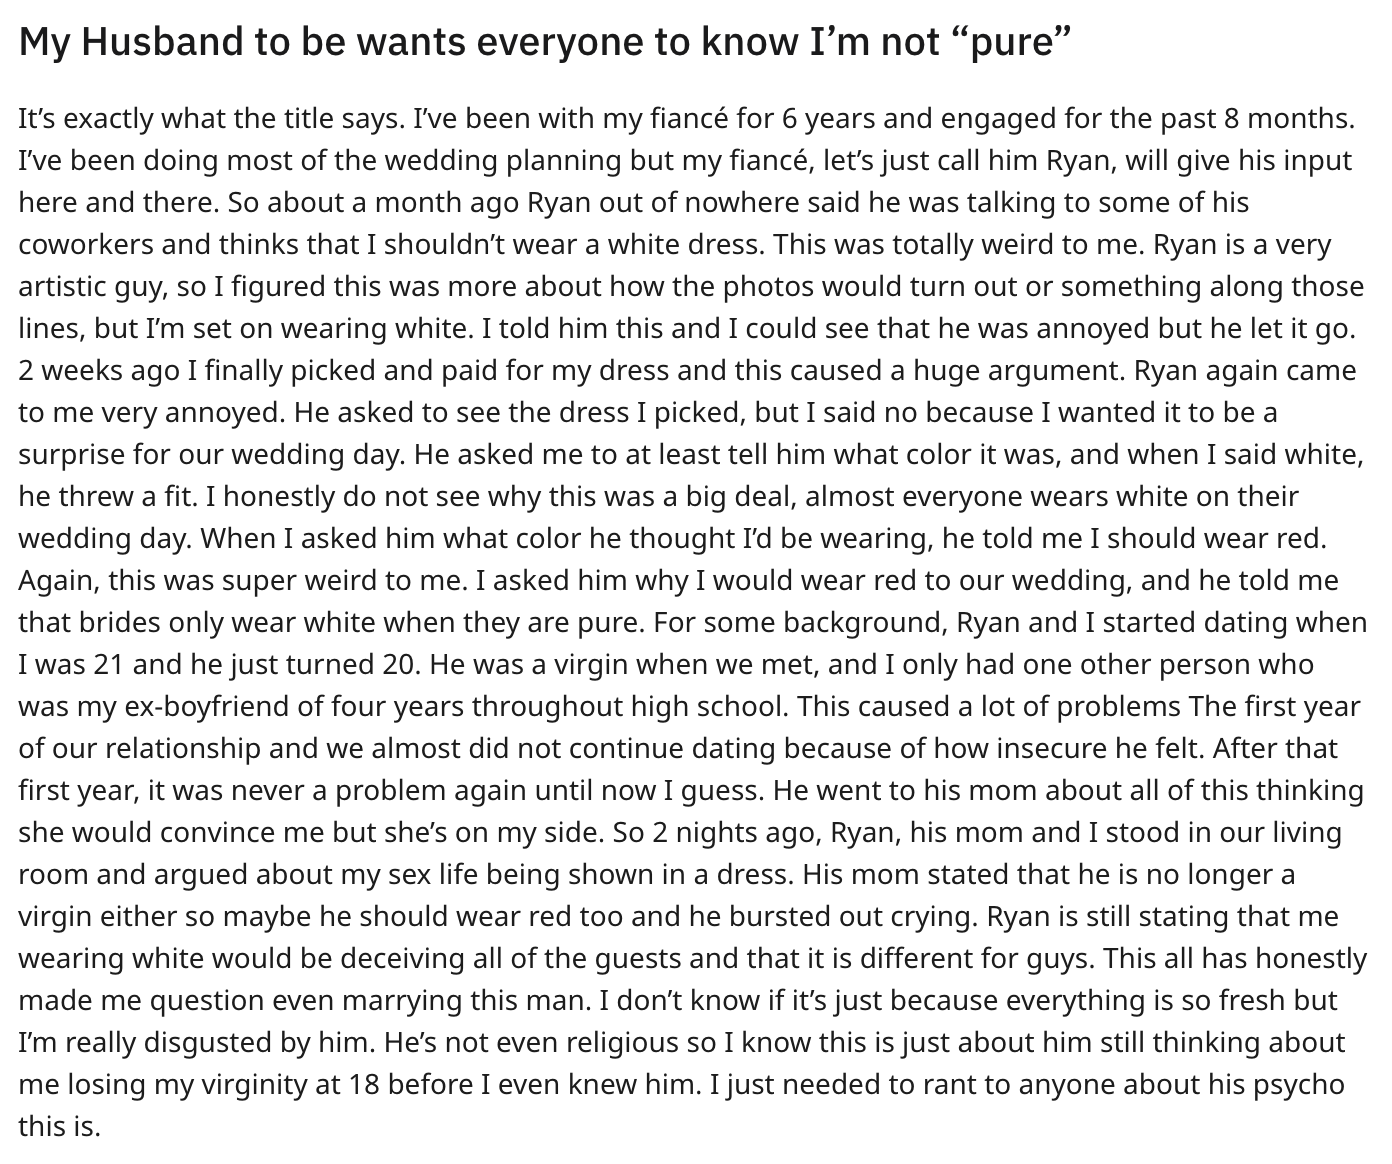 &quot;My Husband to be wants everyone to know I&#x27;m not &#x27;pure&#x27;&quot;